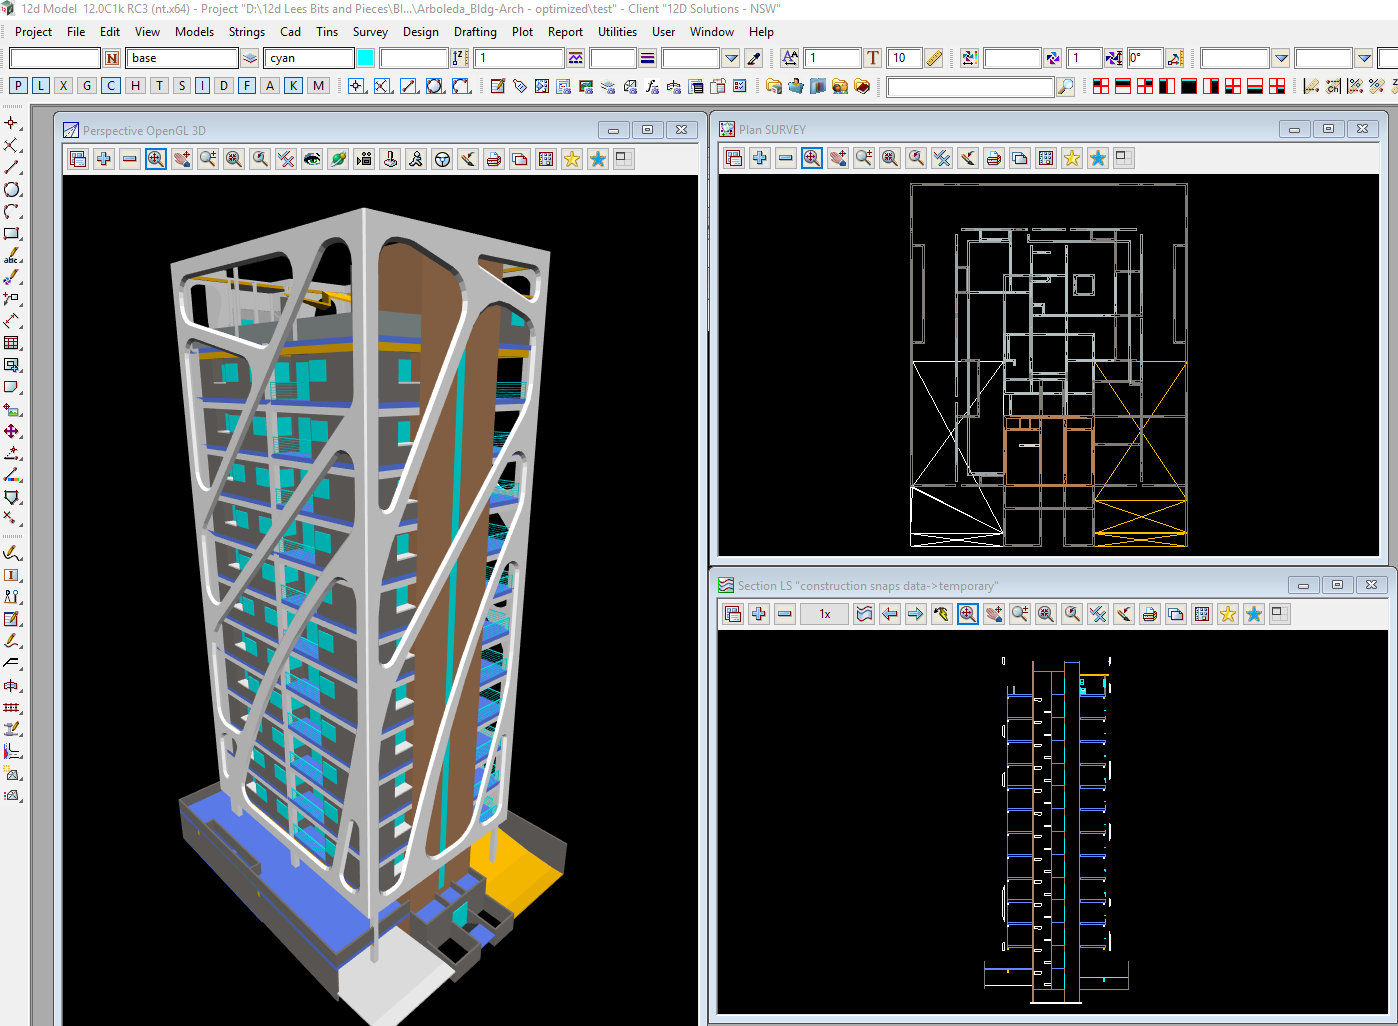 Data loaded into 12d Model from ArchiCAD IFC files